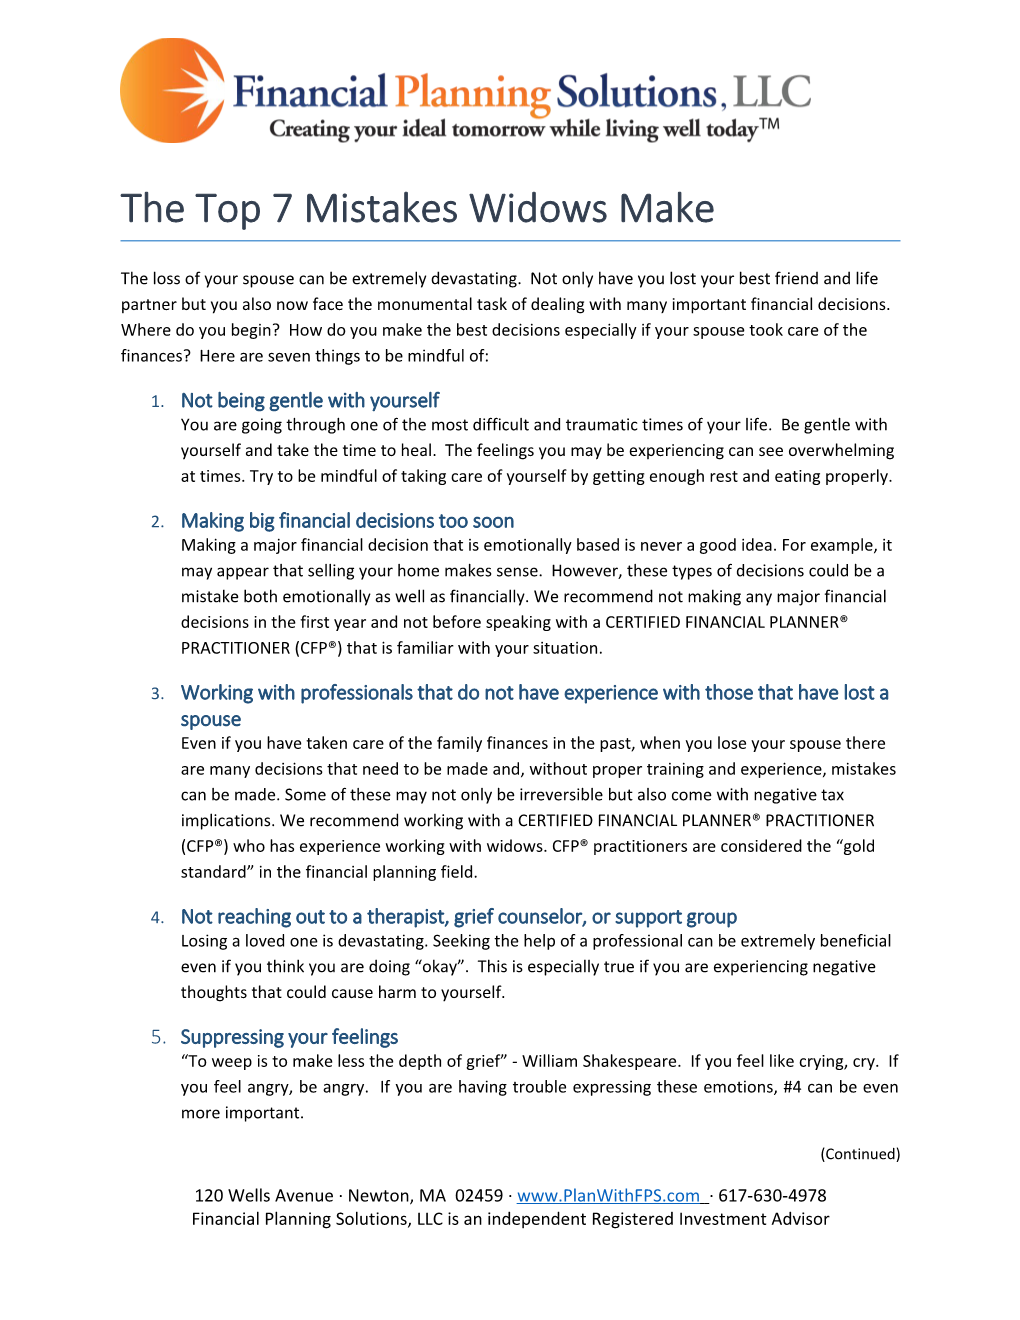 The Top 7 Mistakes Widows Make